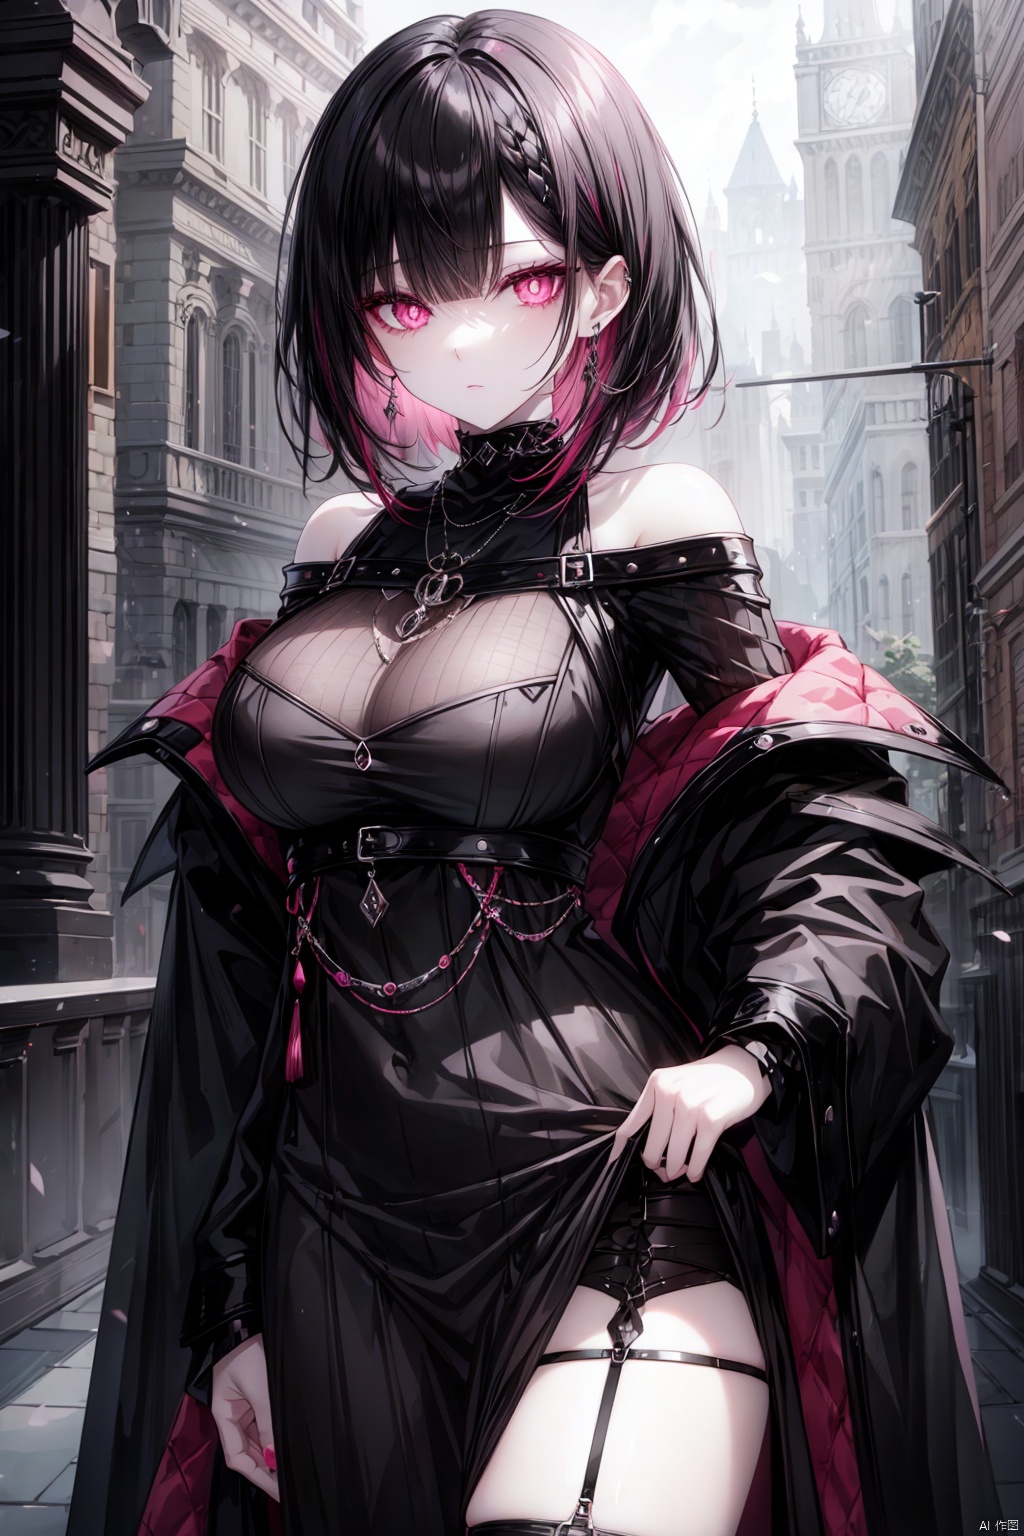 Black hair with pink highlights, large black pupils, dark clothing with lots of jewelry, dark romantic fantasy setting, pale skin